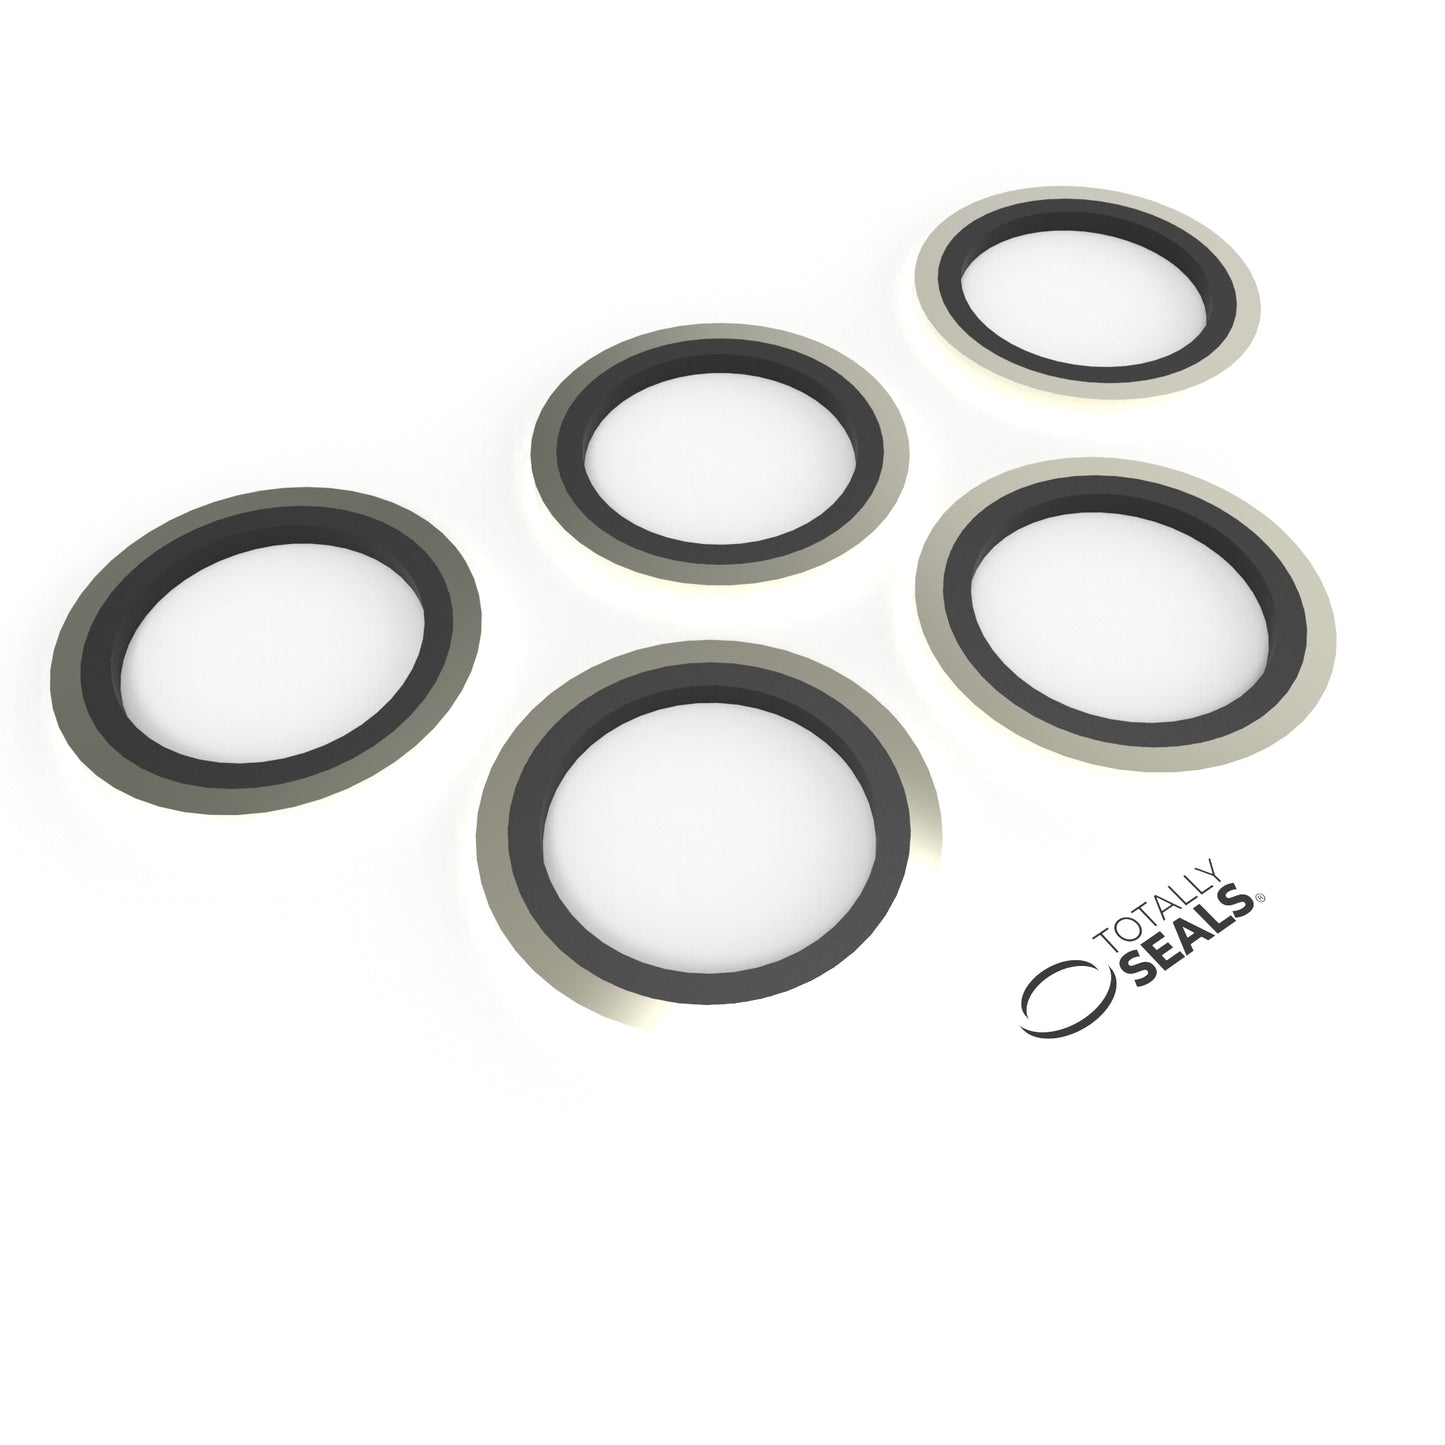 M16 Bonded Seals (Dowty Washers) - Totally Seals®